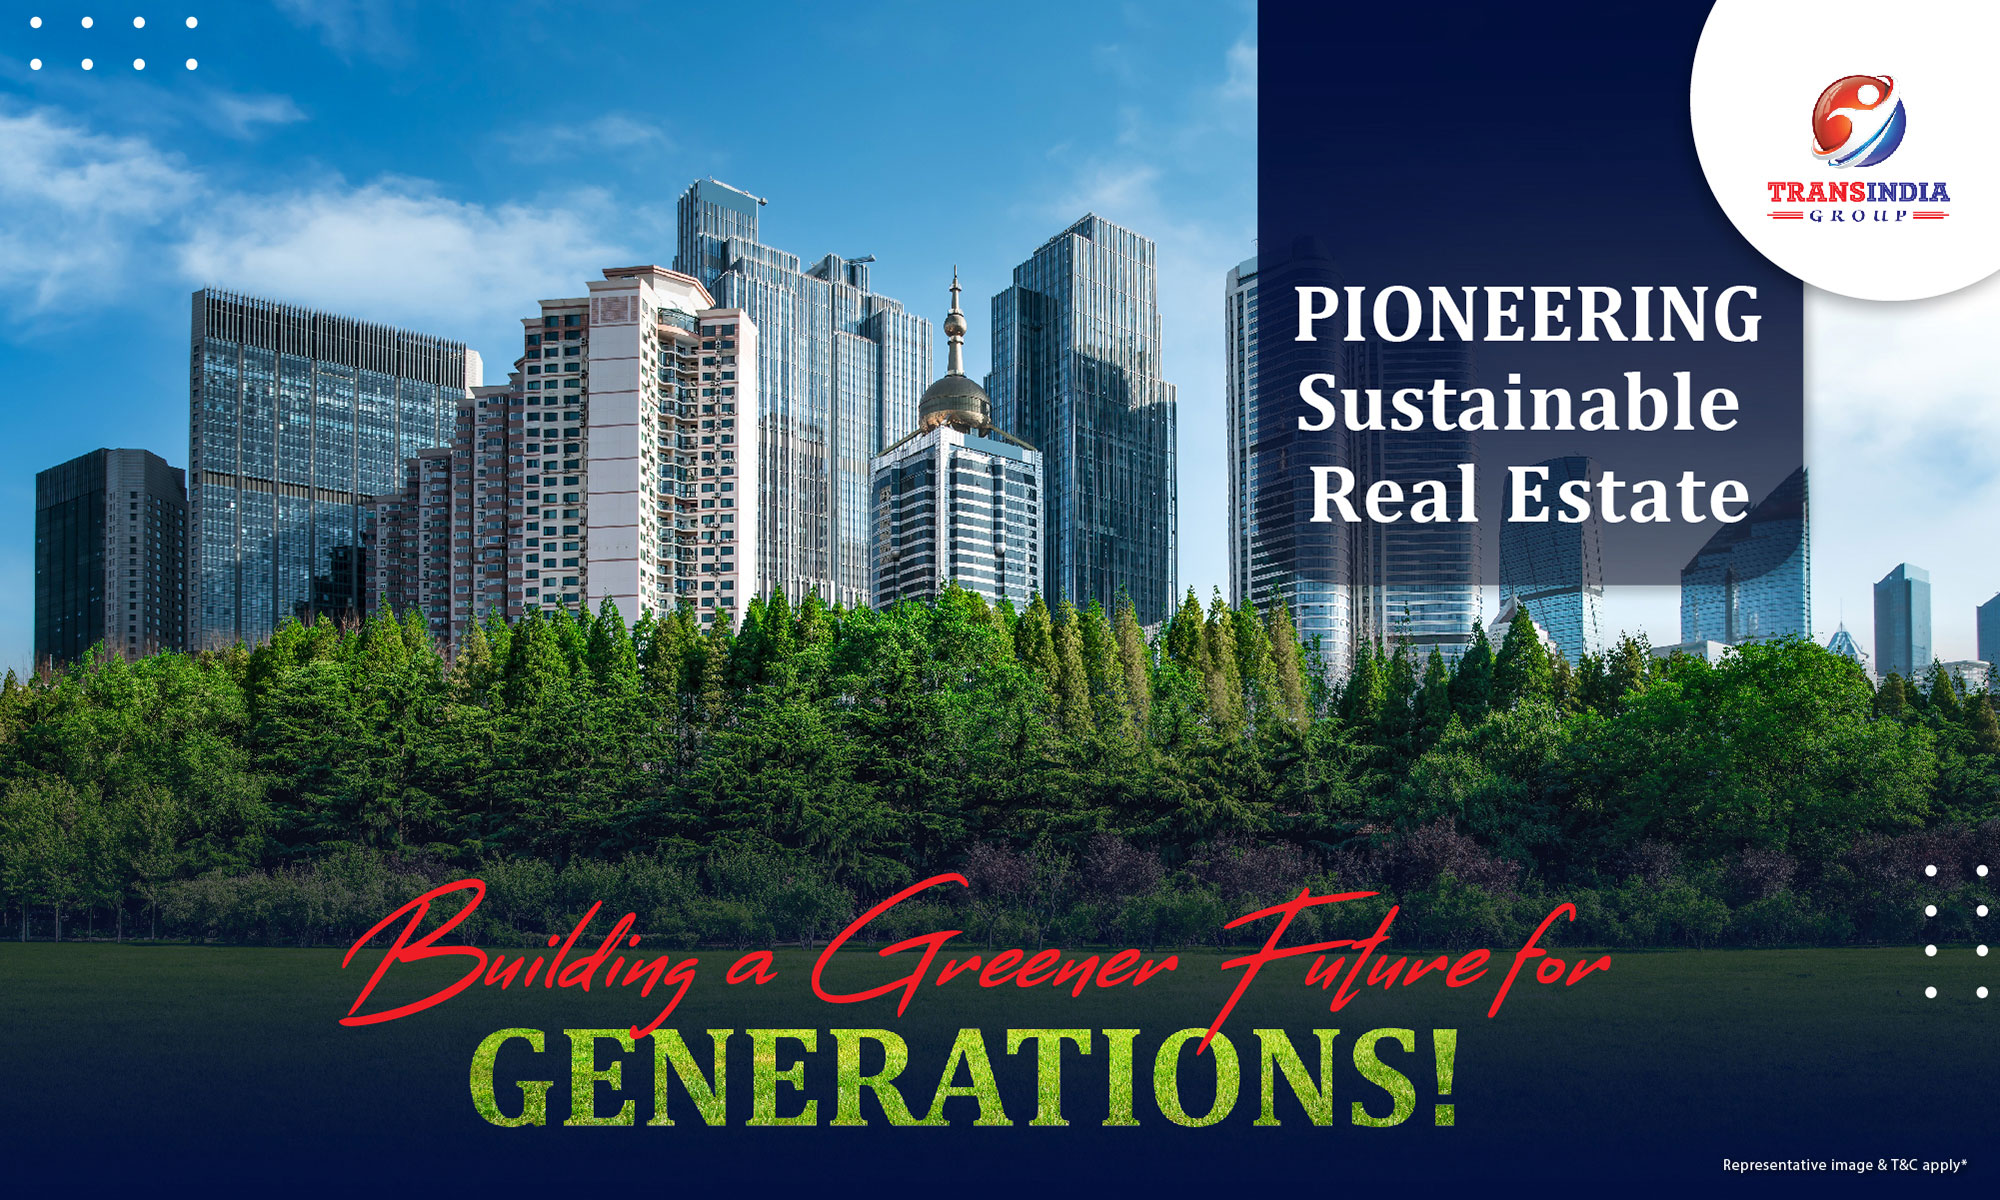 Pioneering Sustainable Real Estate – Building a Greener Future for Generations